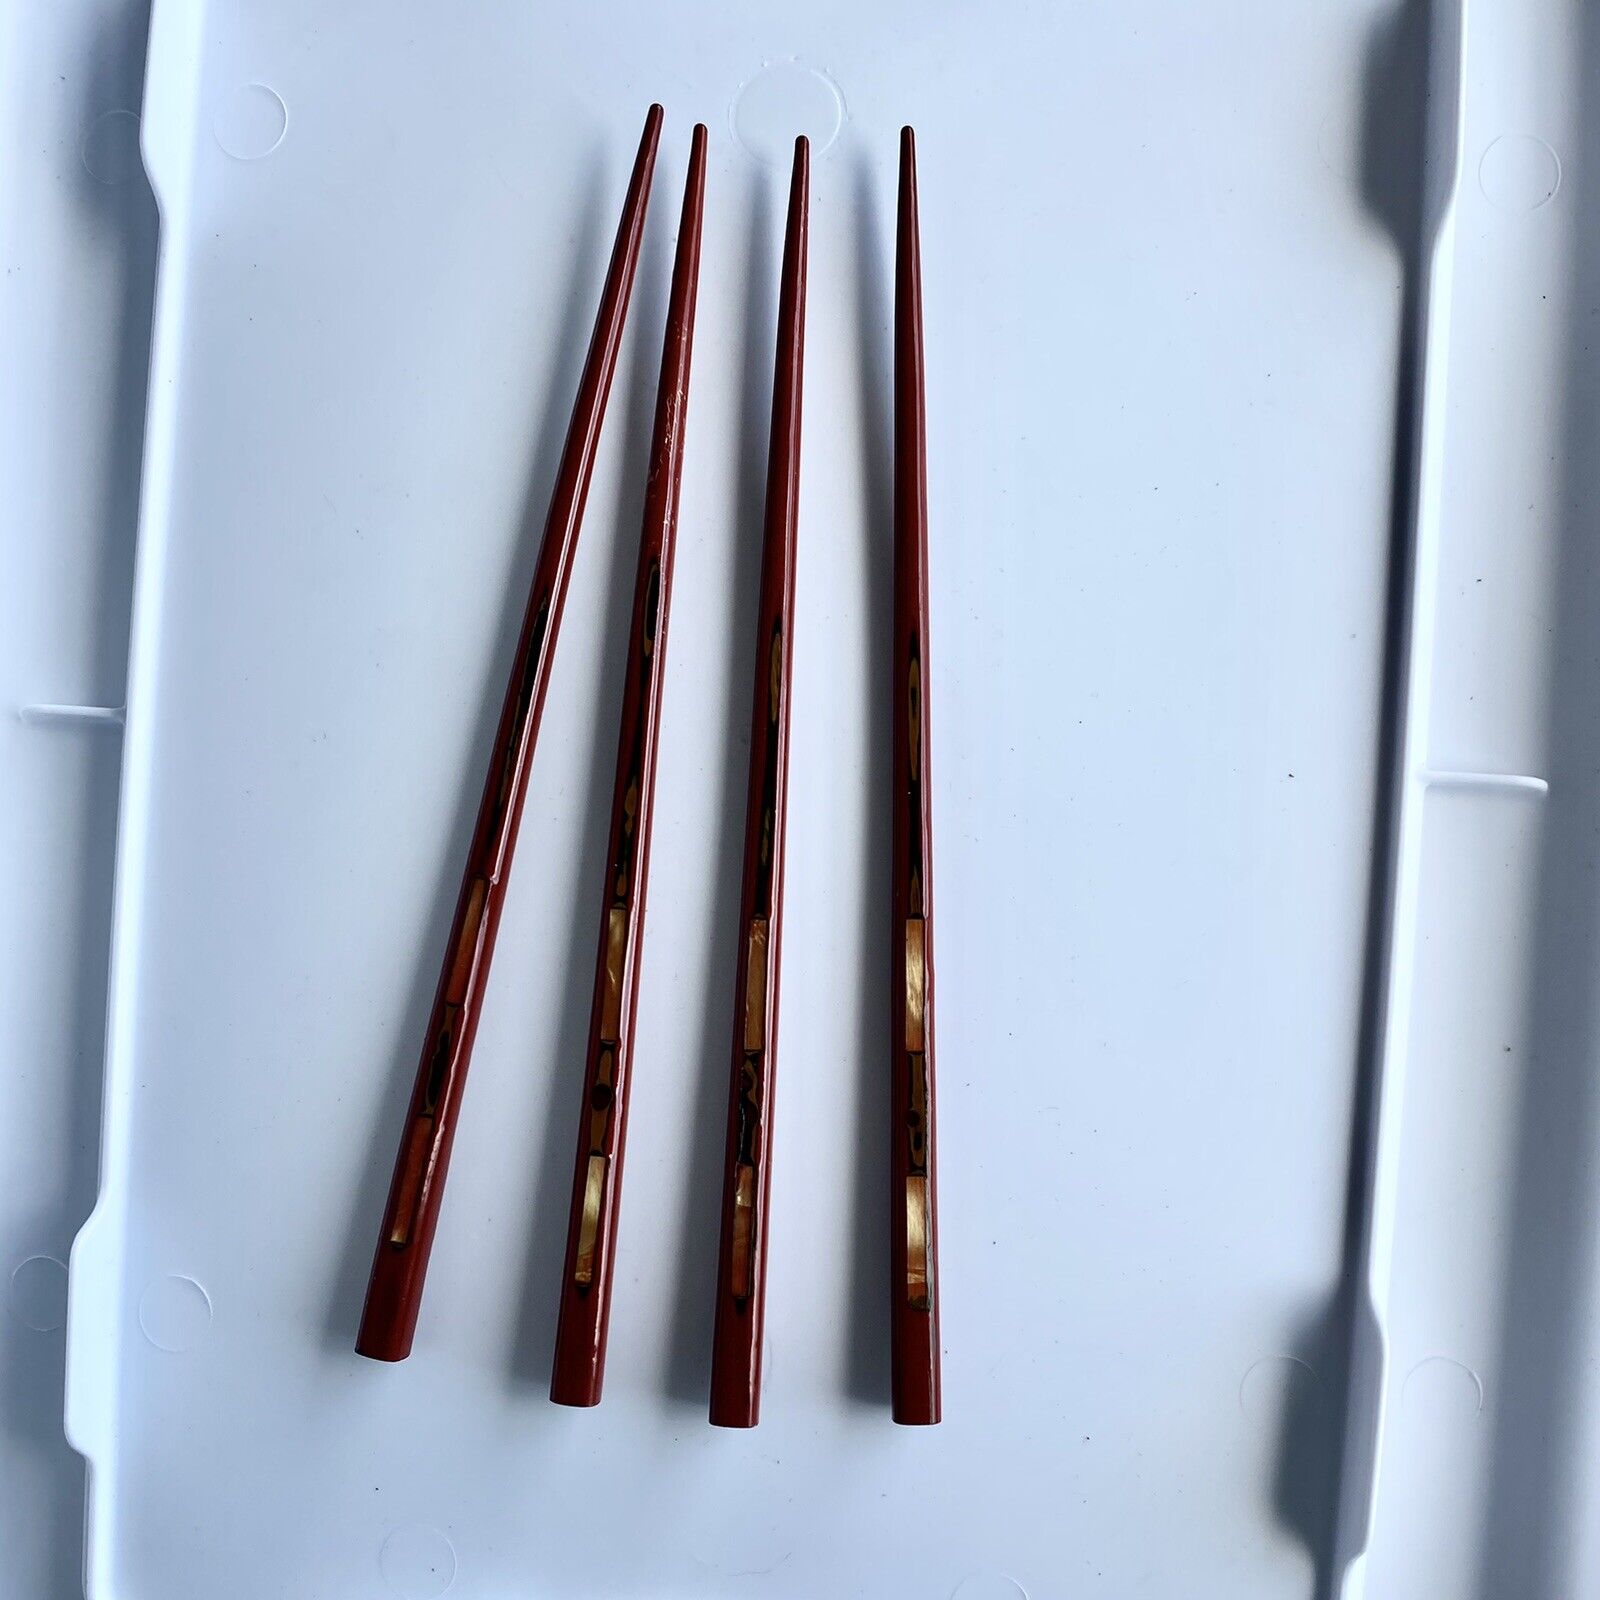 Vintage Red & Black Lacquer Eggshell Abalone Shell Inlay Chopsticks 2 Pair..150